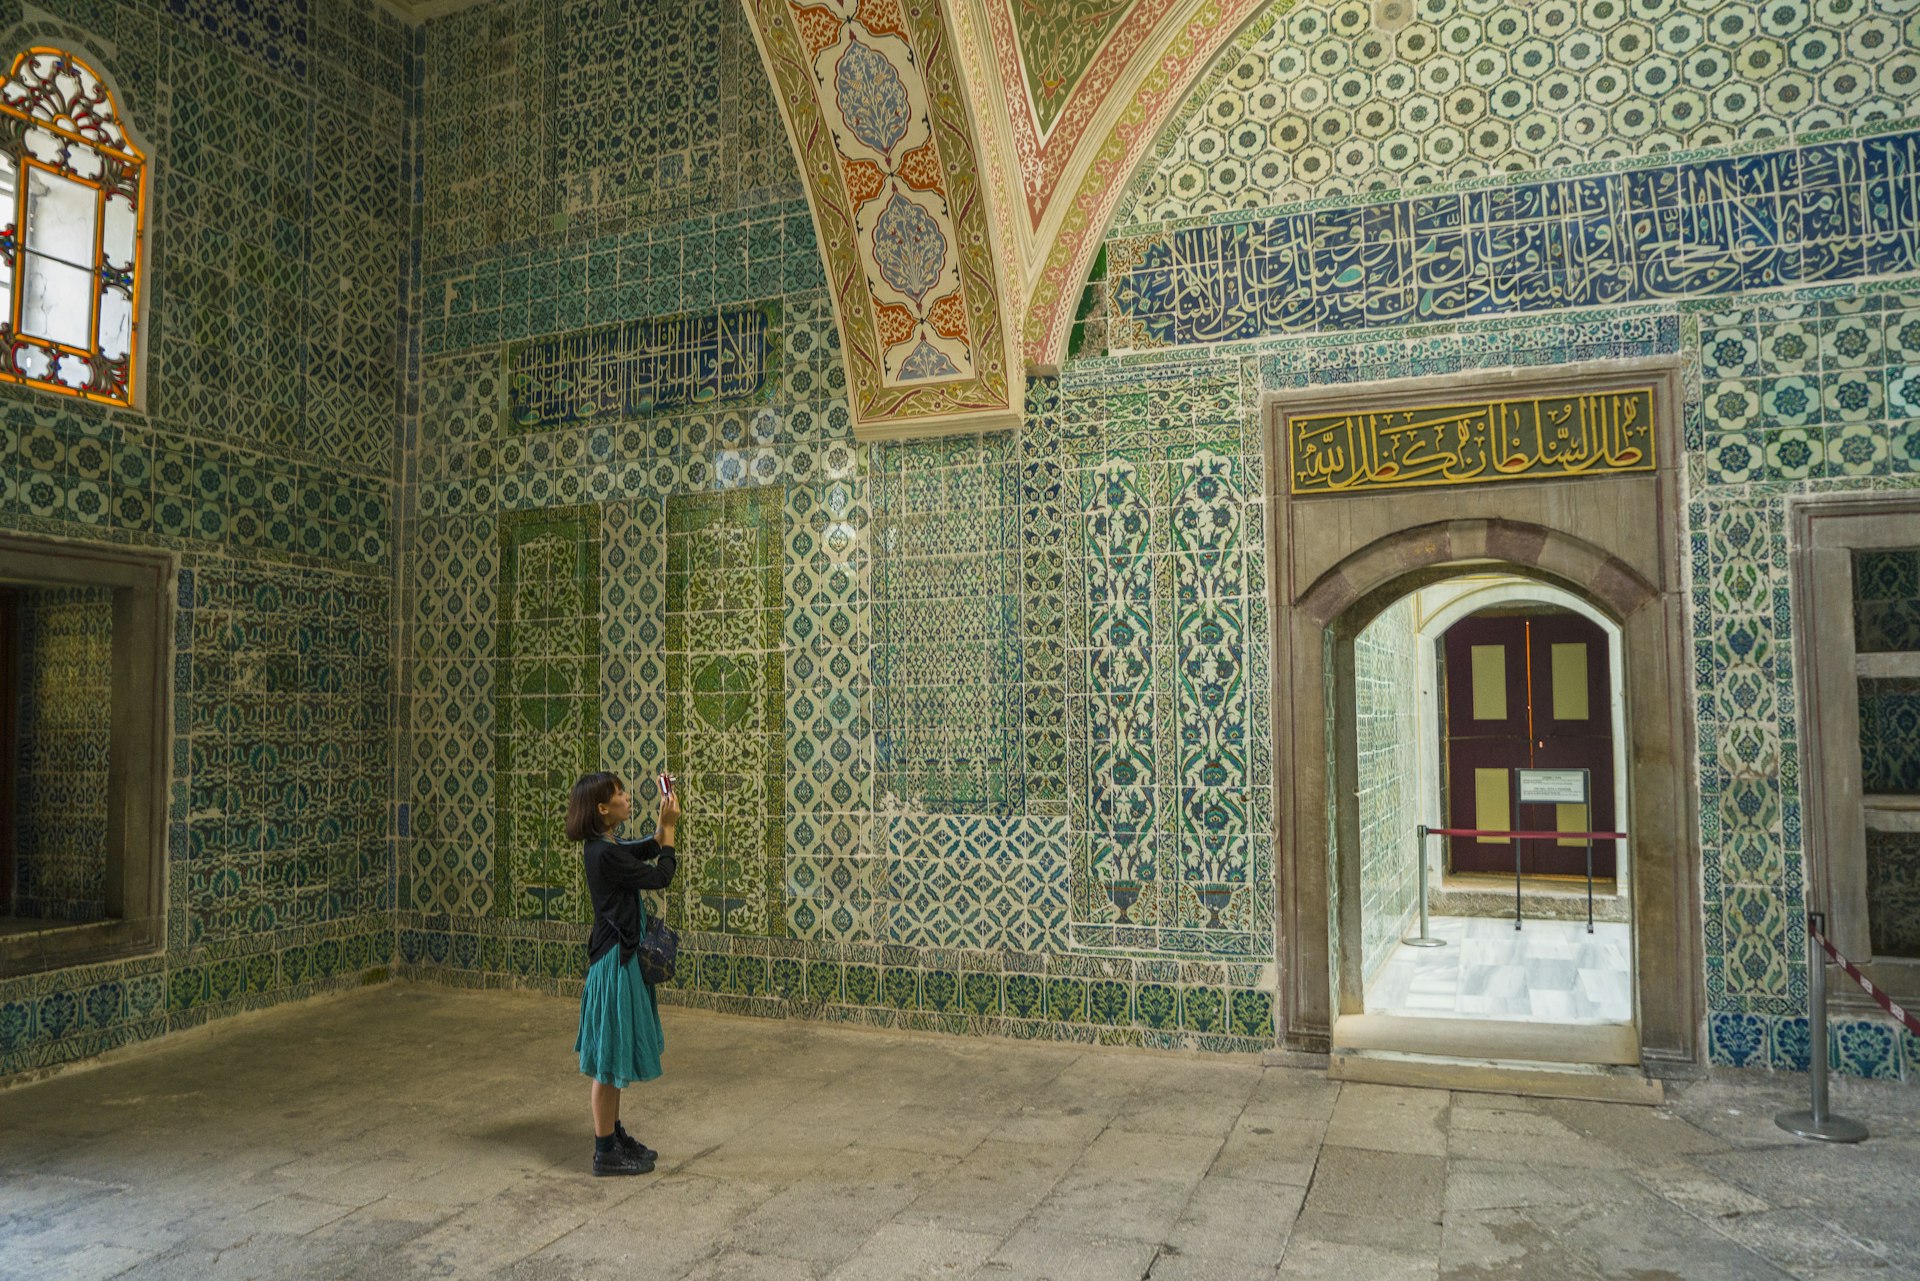 Visitor admiring the architecture of Topkapi Palace in Istanbul, Turkey